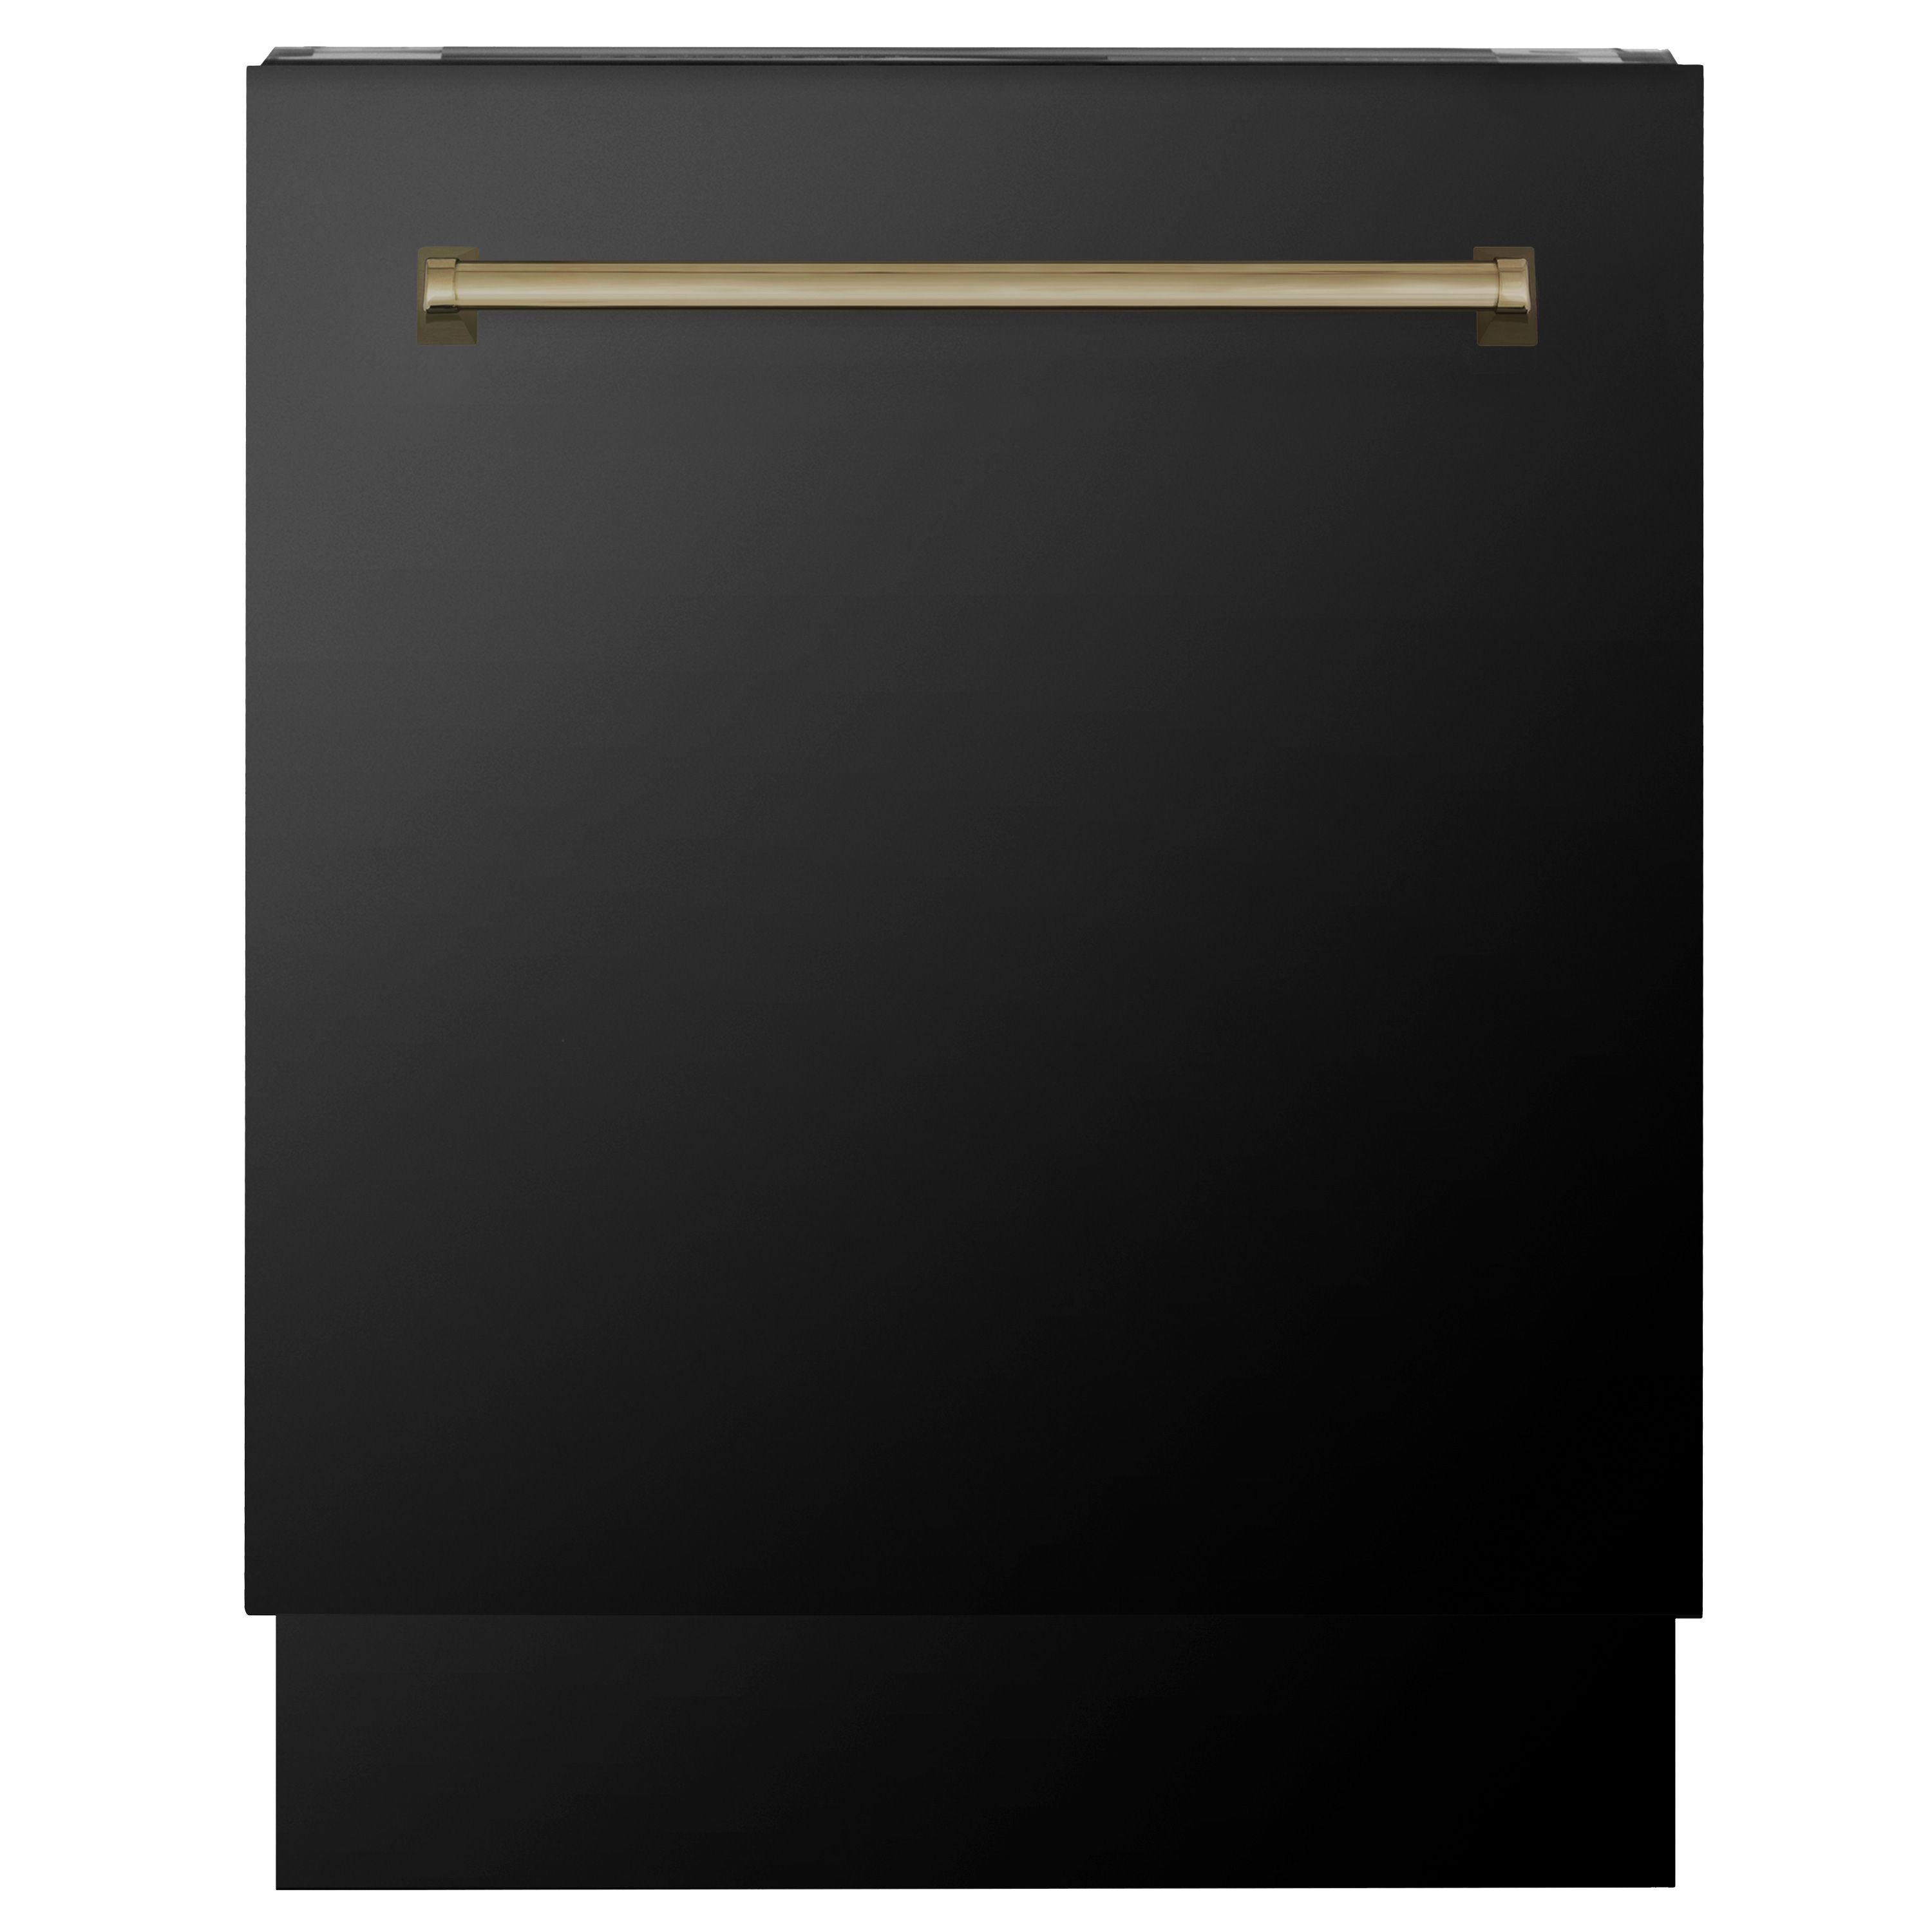 ZLINE Autograph Series 24 inch Tall Dishwasher in Black Stainless Steel with Champagne Bronze Handle